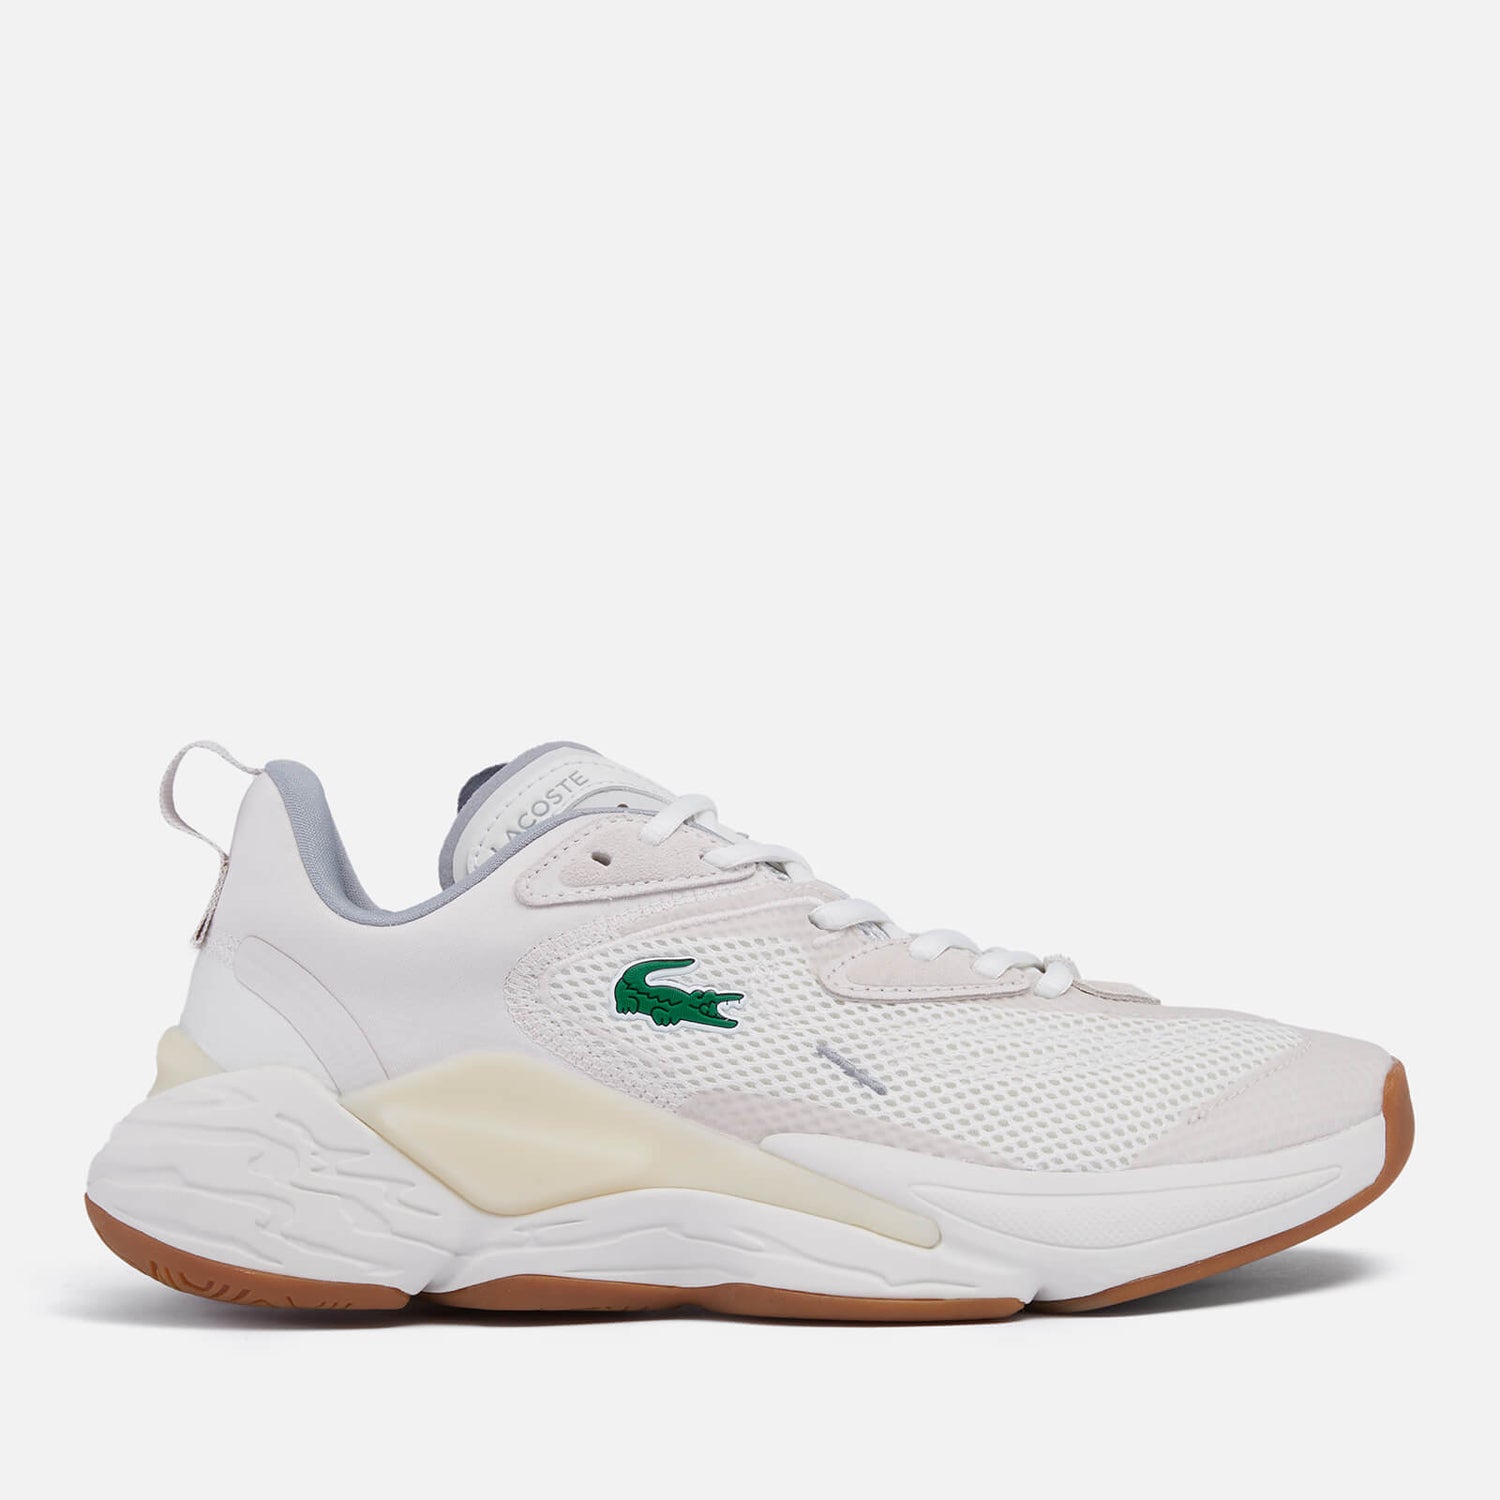 Lacoste Women's Aceshot 0722 1 Running Style Trainers - Off White/Off White - UK 3